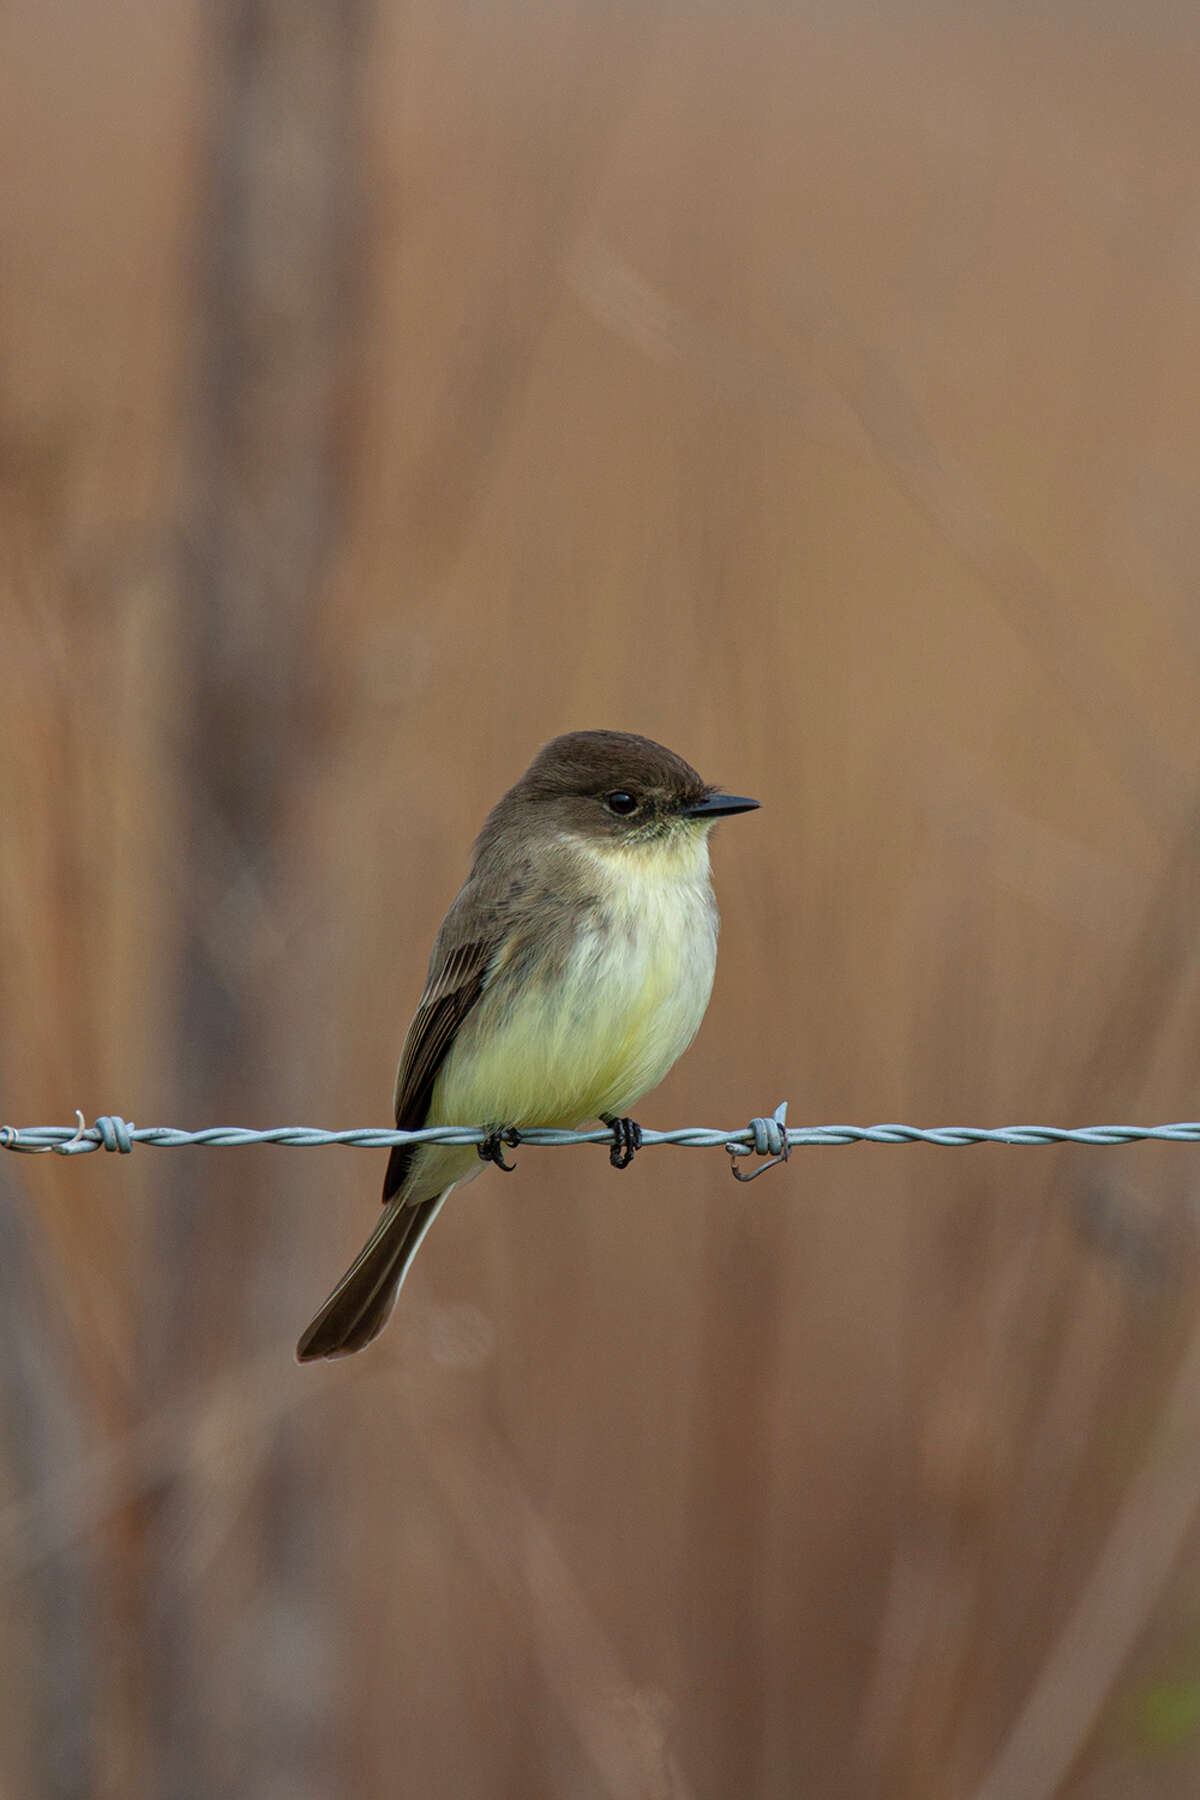 Eastern phoebe are a winter migrant to the Houston area but resident in the Texas Hill Country or North Central Texas. Photo Credit: Kathy Adams Clark. Restricted use.